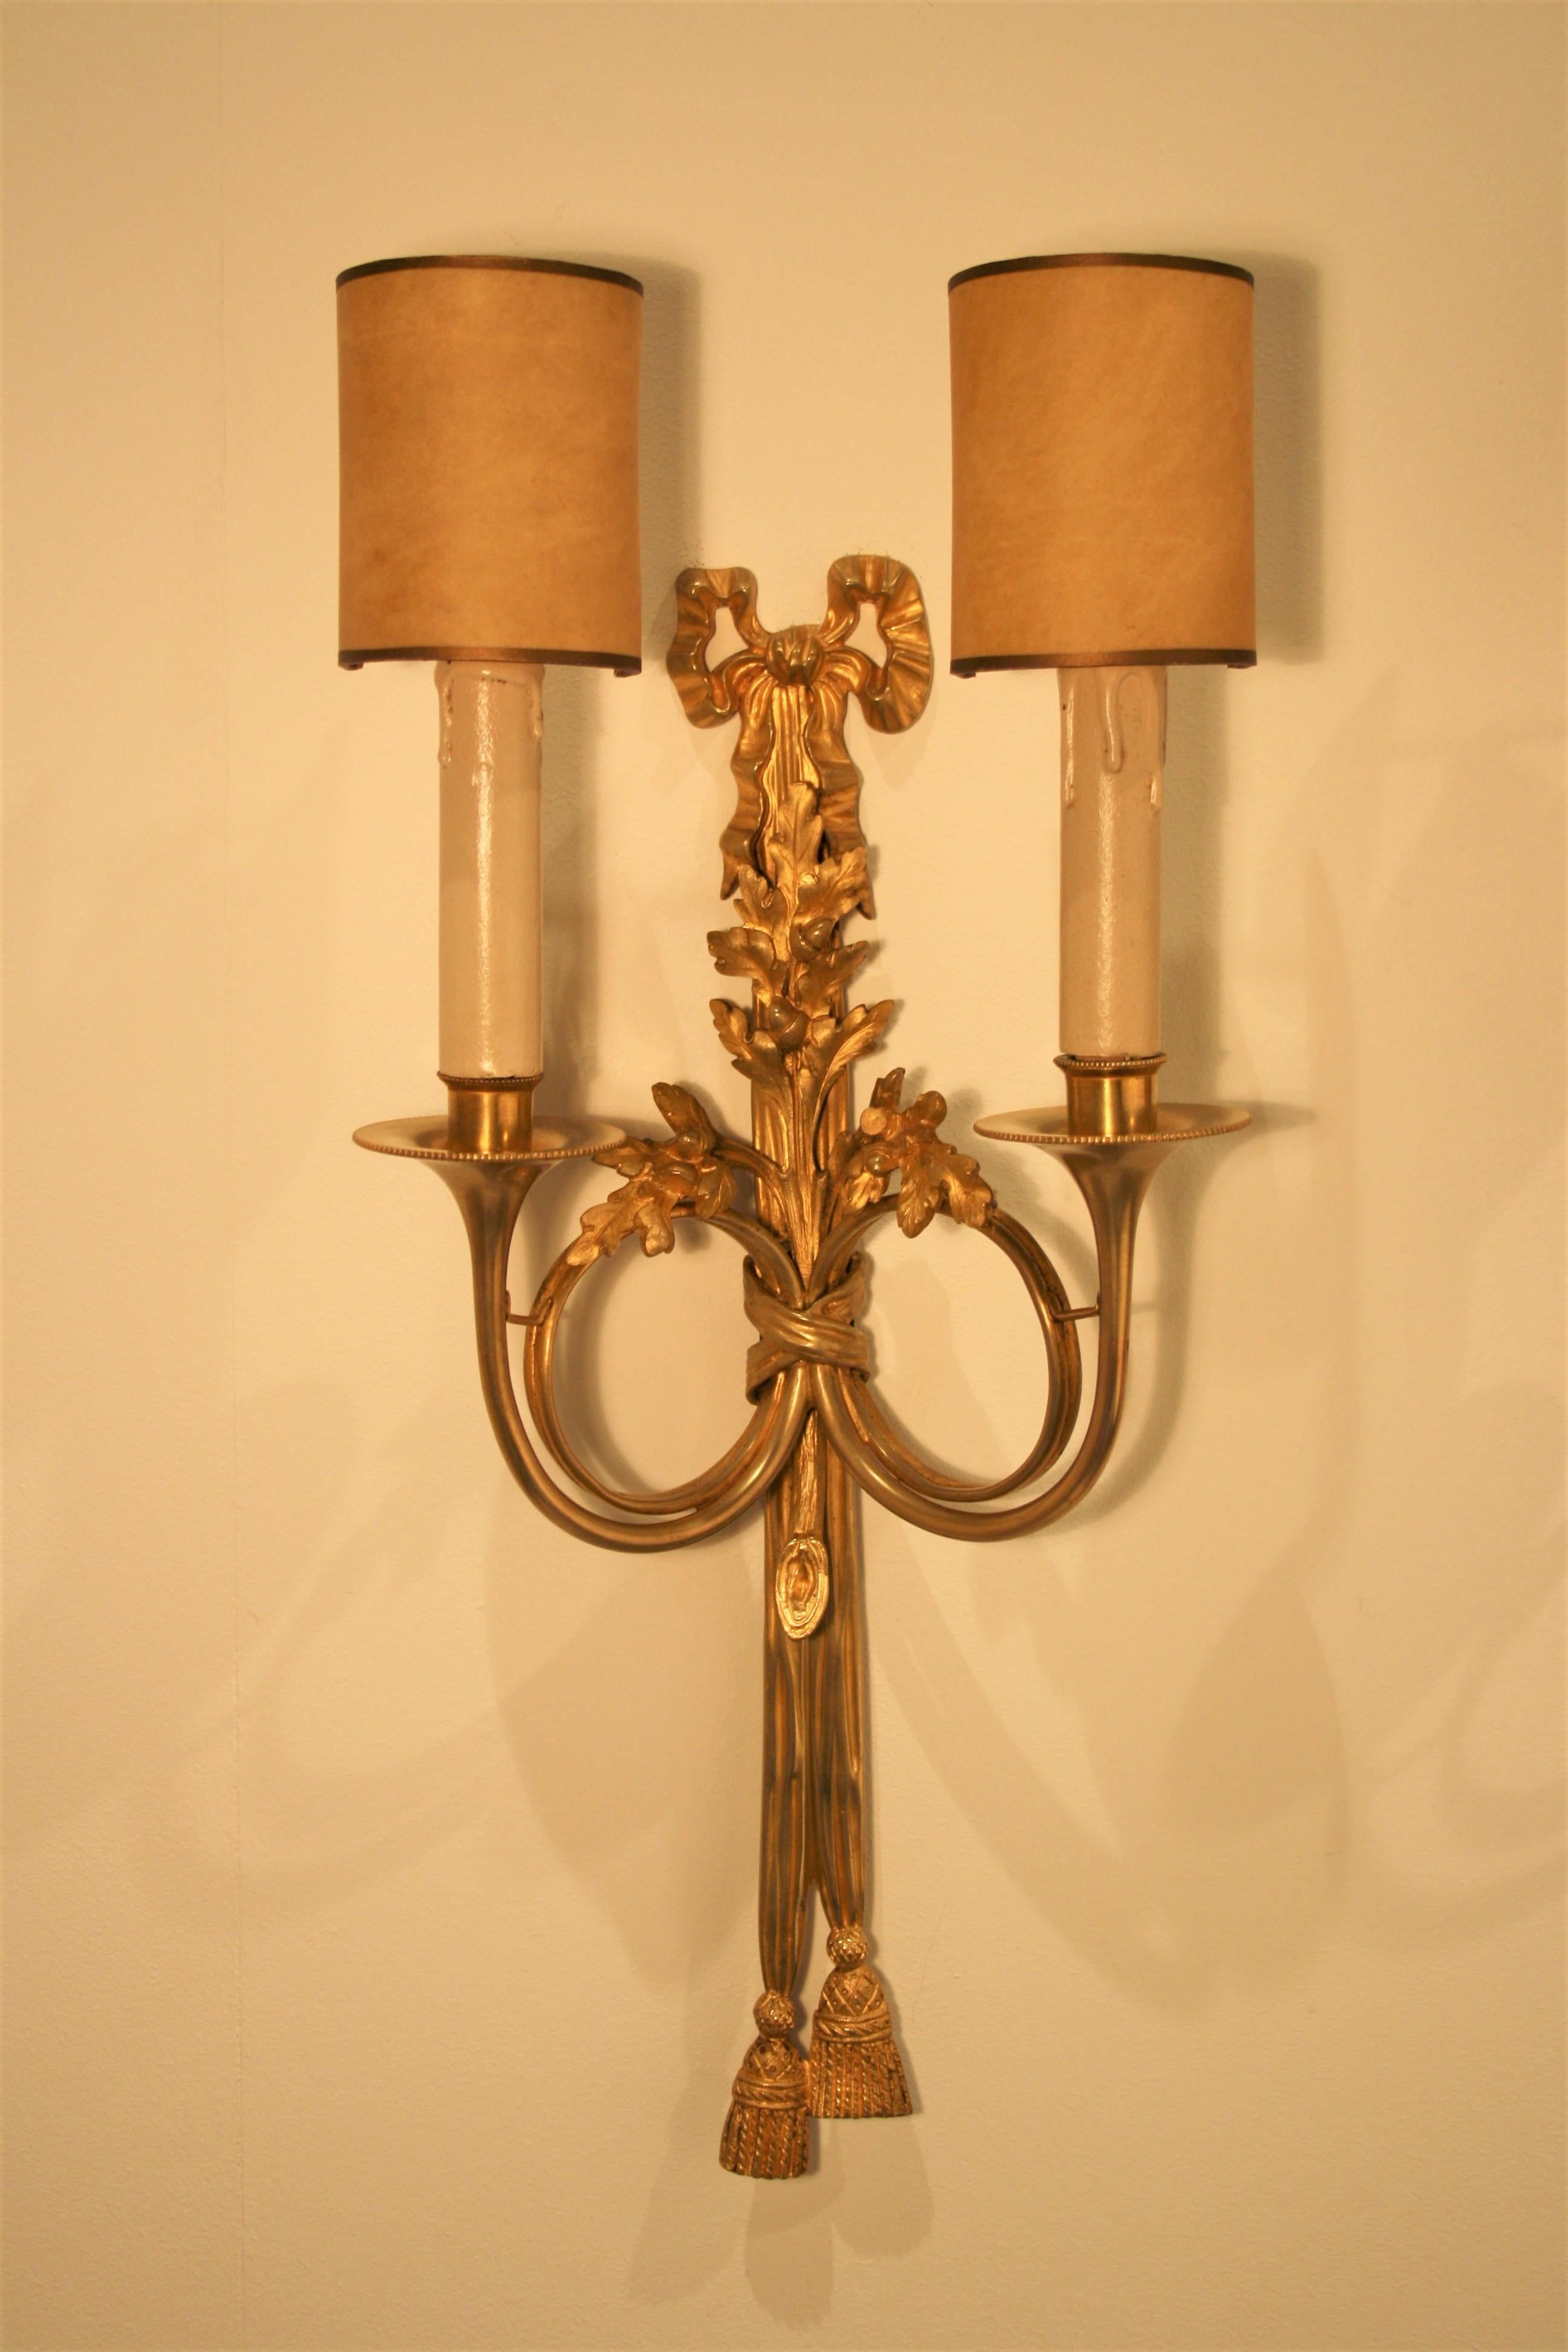 A pair of 24-carat gilt bronze sconces from the famous Maison Baguès in Paris, Louis XVI style.
The bronze is very finely carved and the gilding that used Baguès for these sconces is very rich and has a warm deep color that cannot be compared with